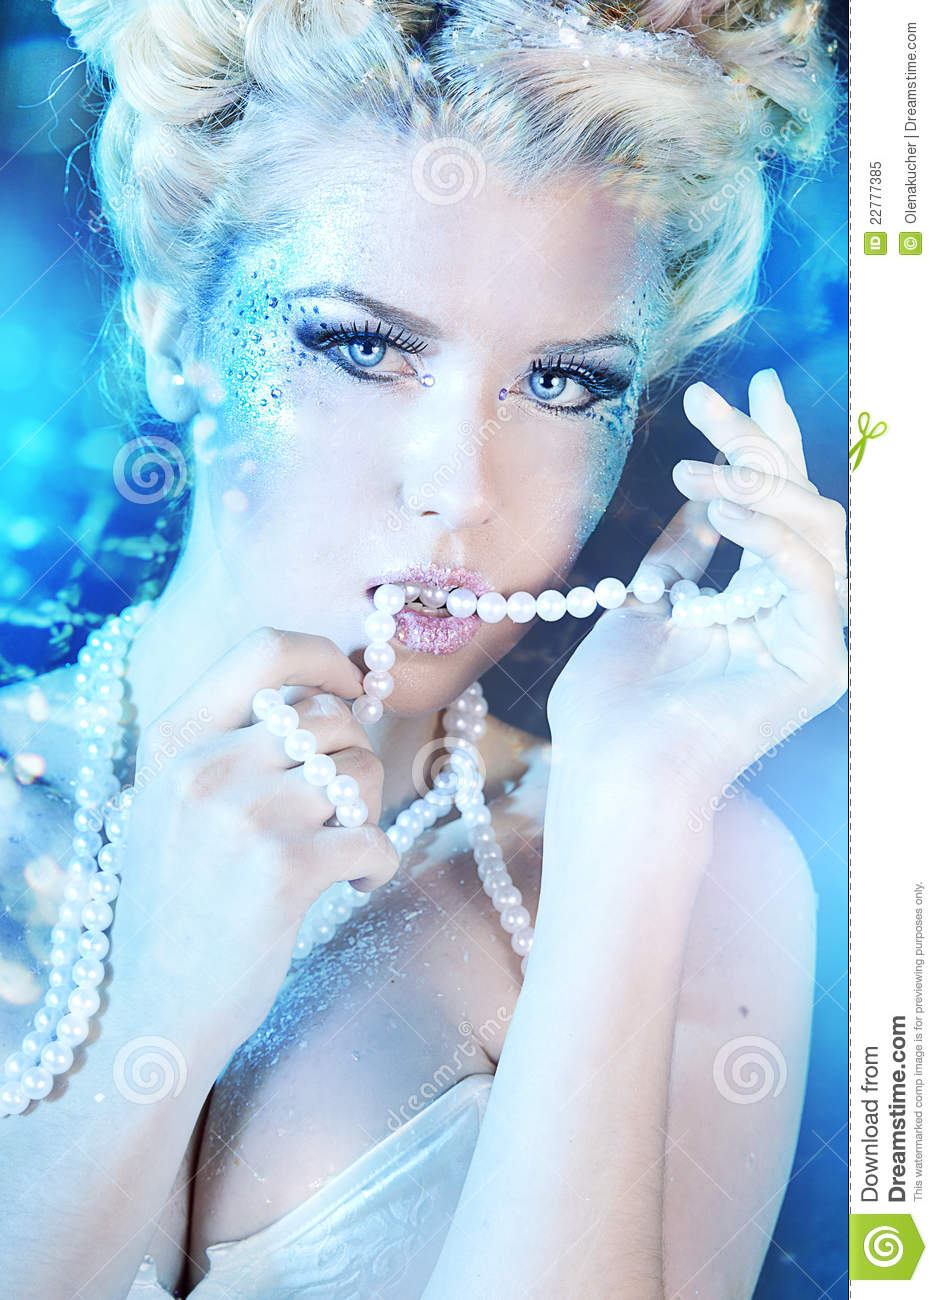 Portrait Of The Snow Queen Royalty Free Stock Photo   Image  22777385